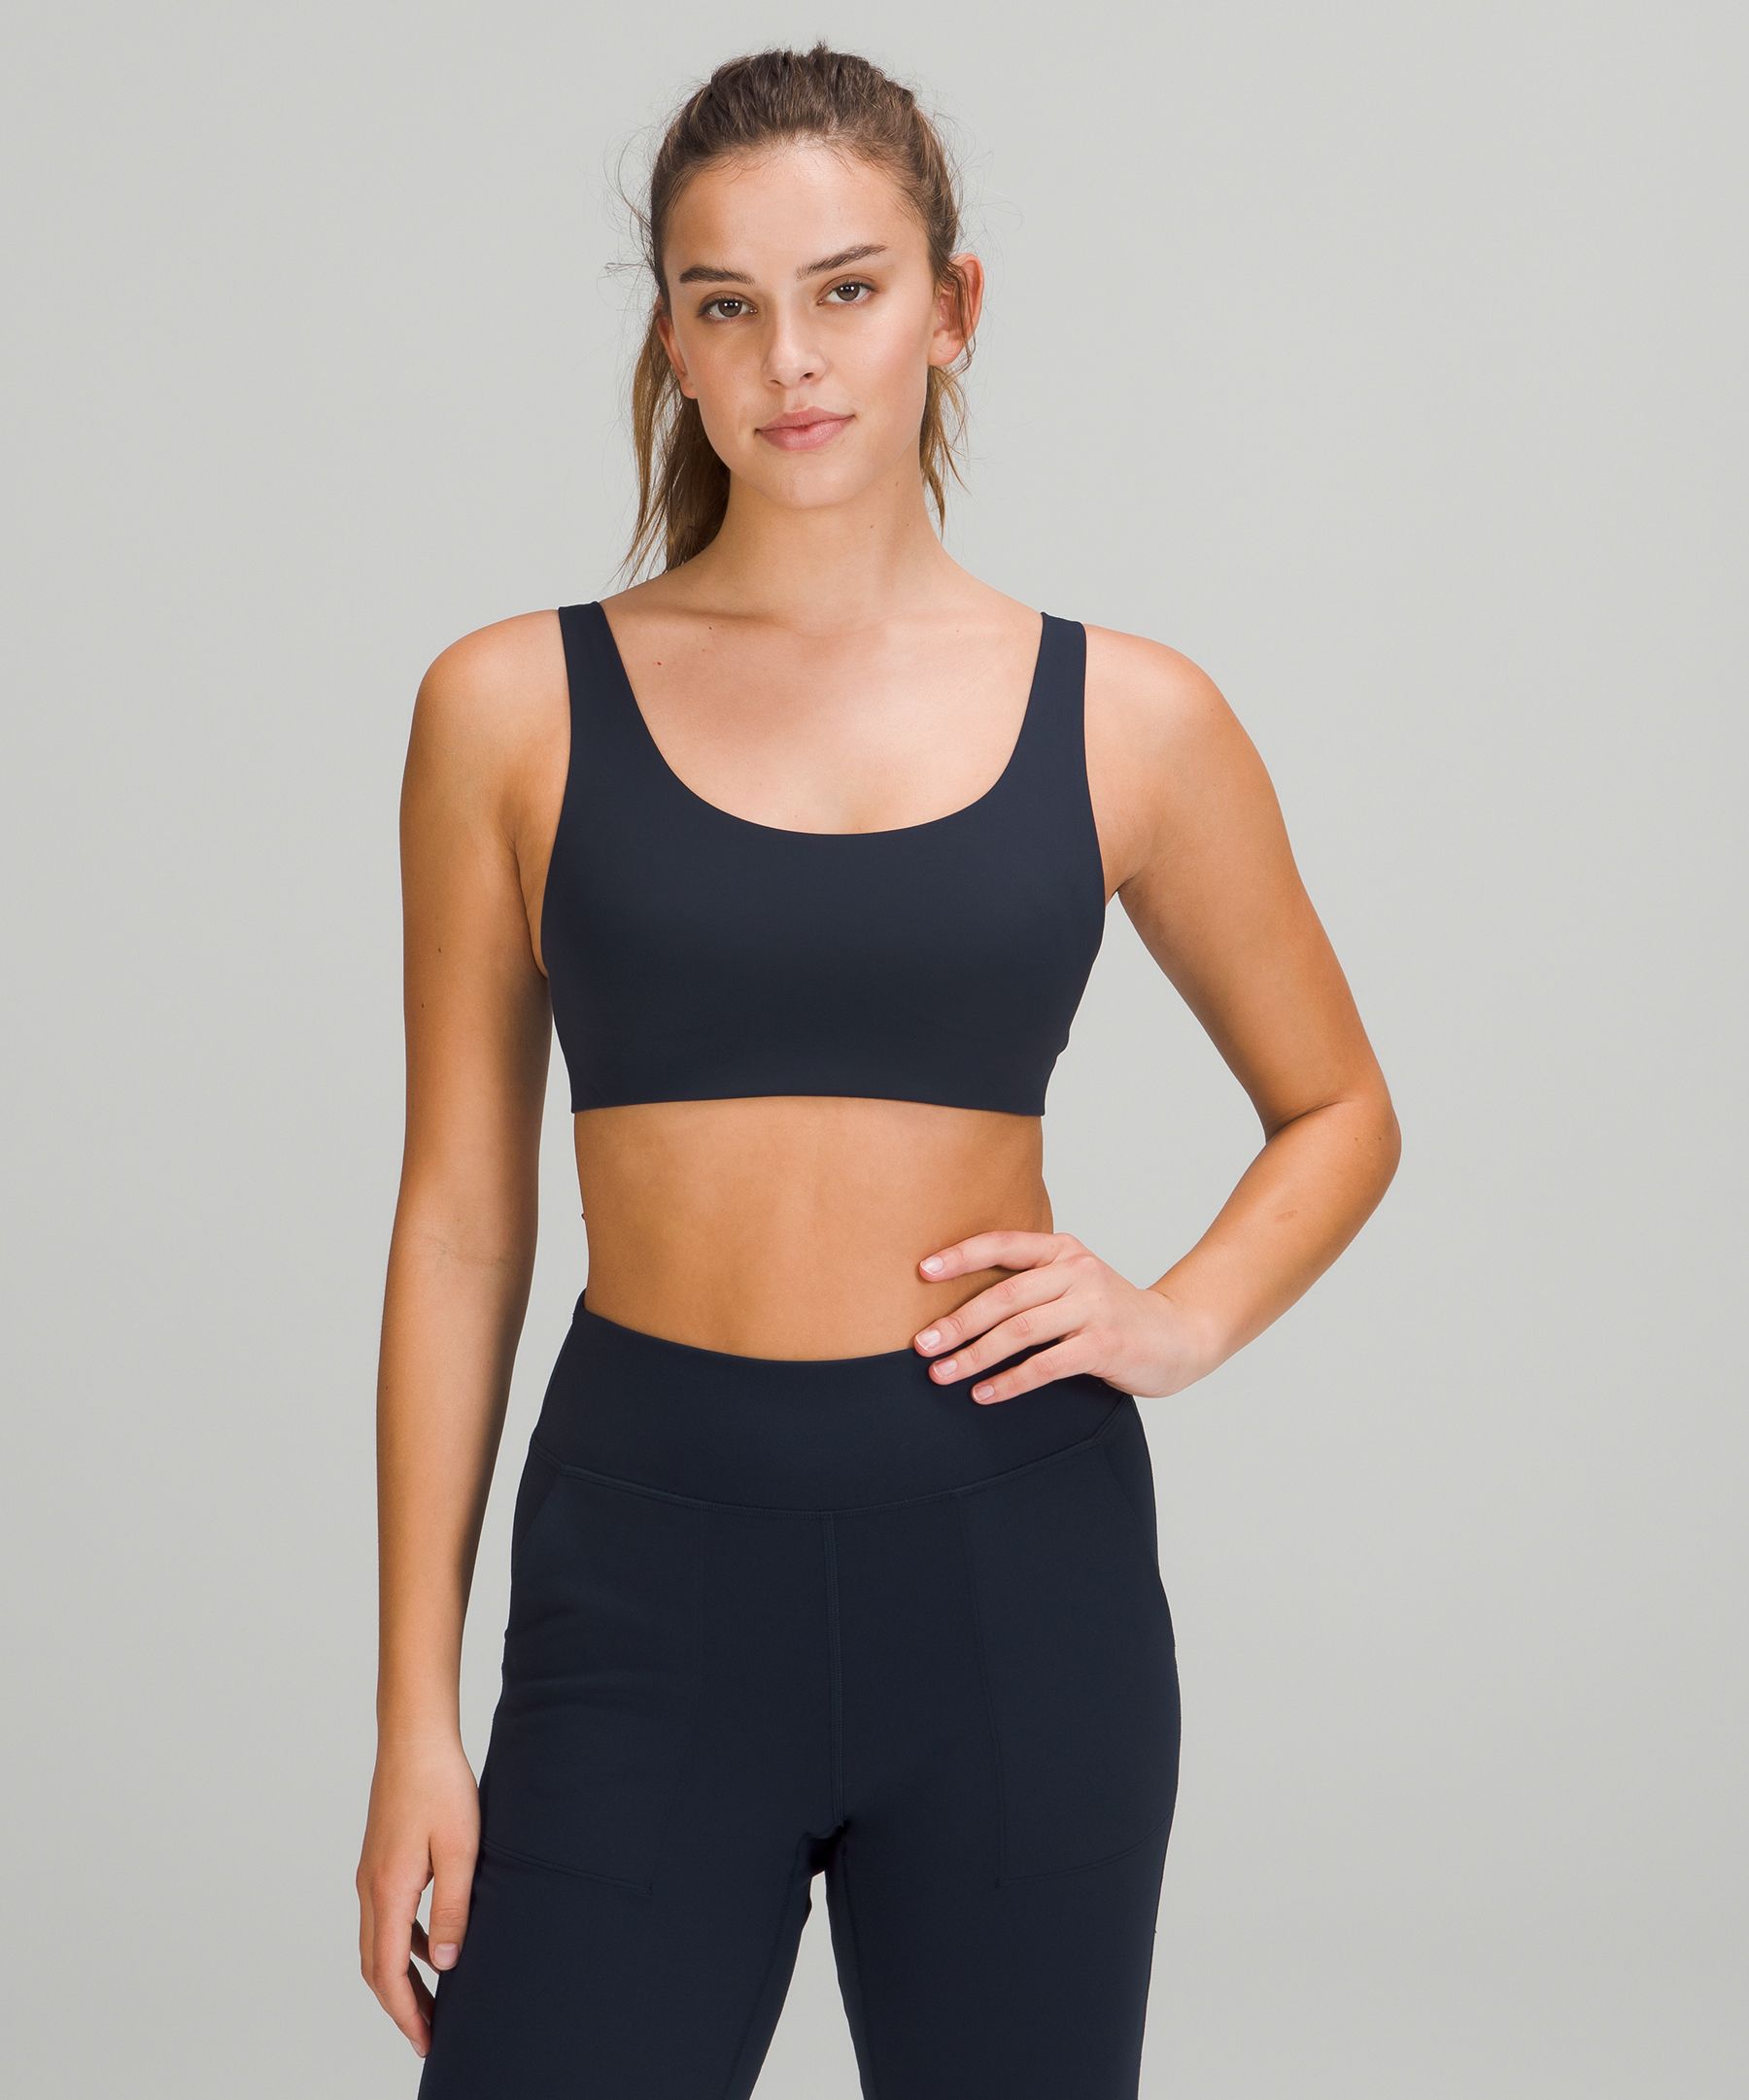 Lululemon In Alignment Straight Strap Bra *Light Support, A/B Cup